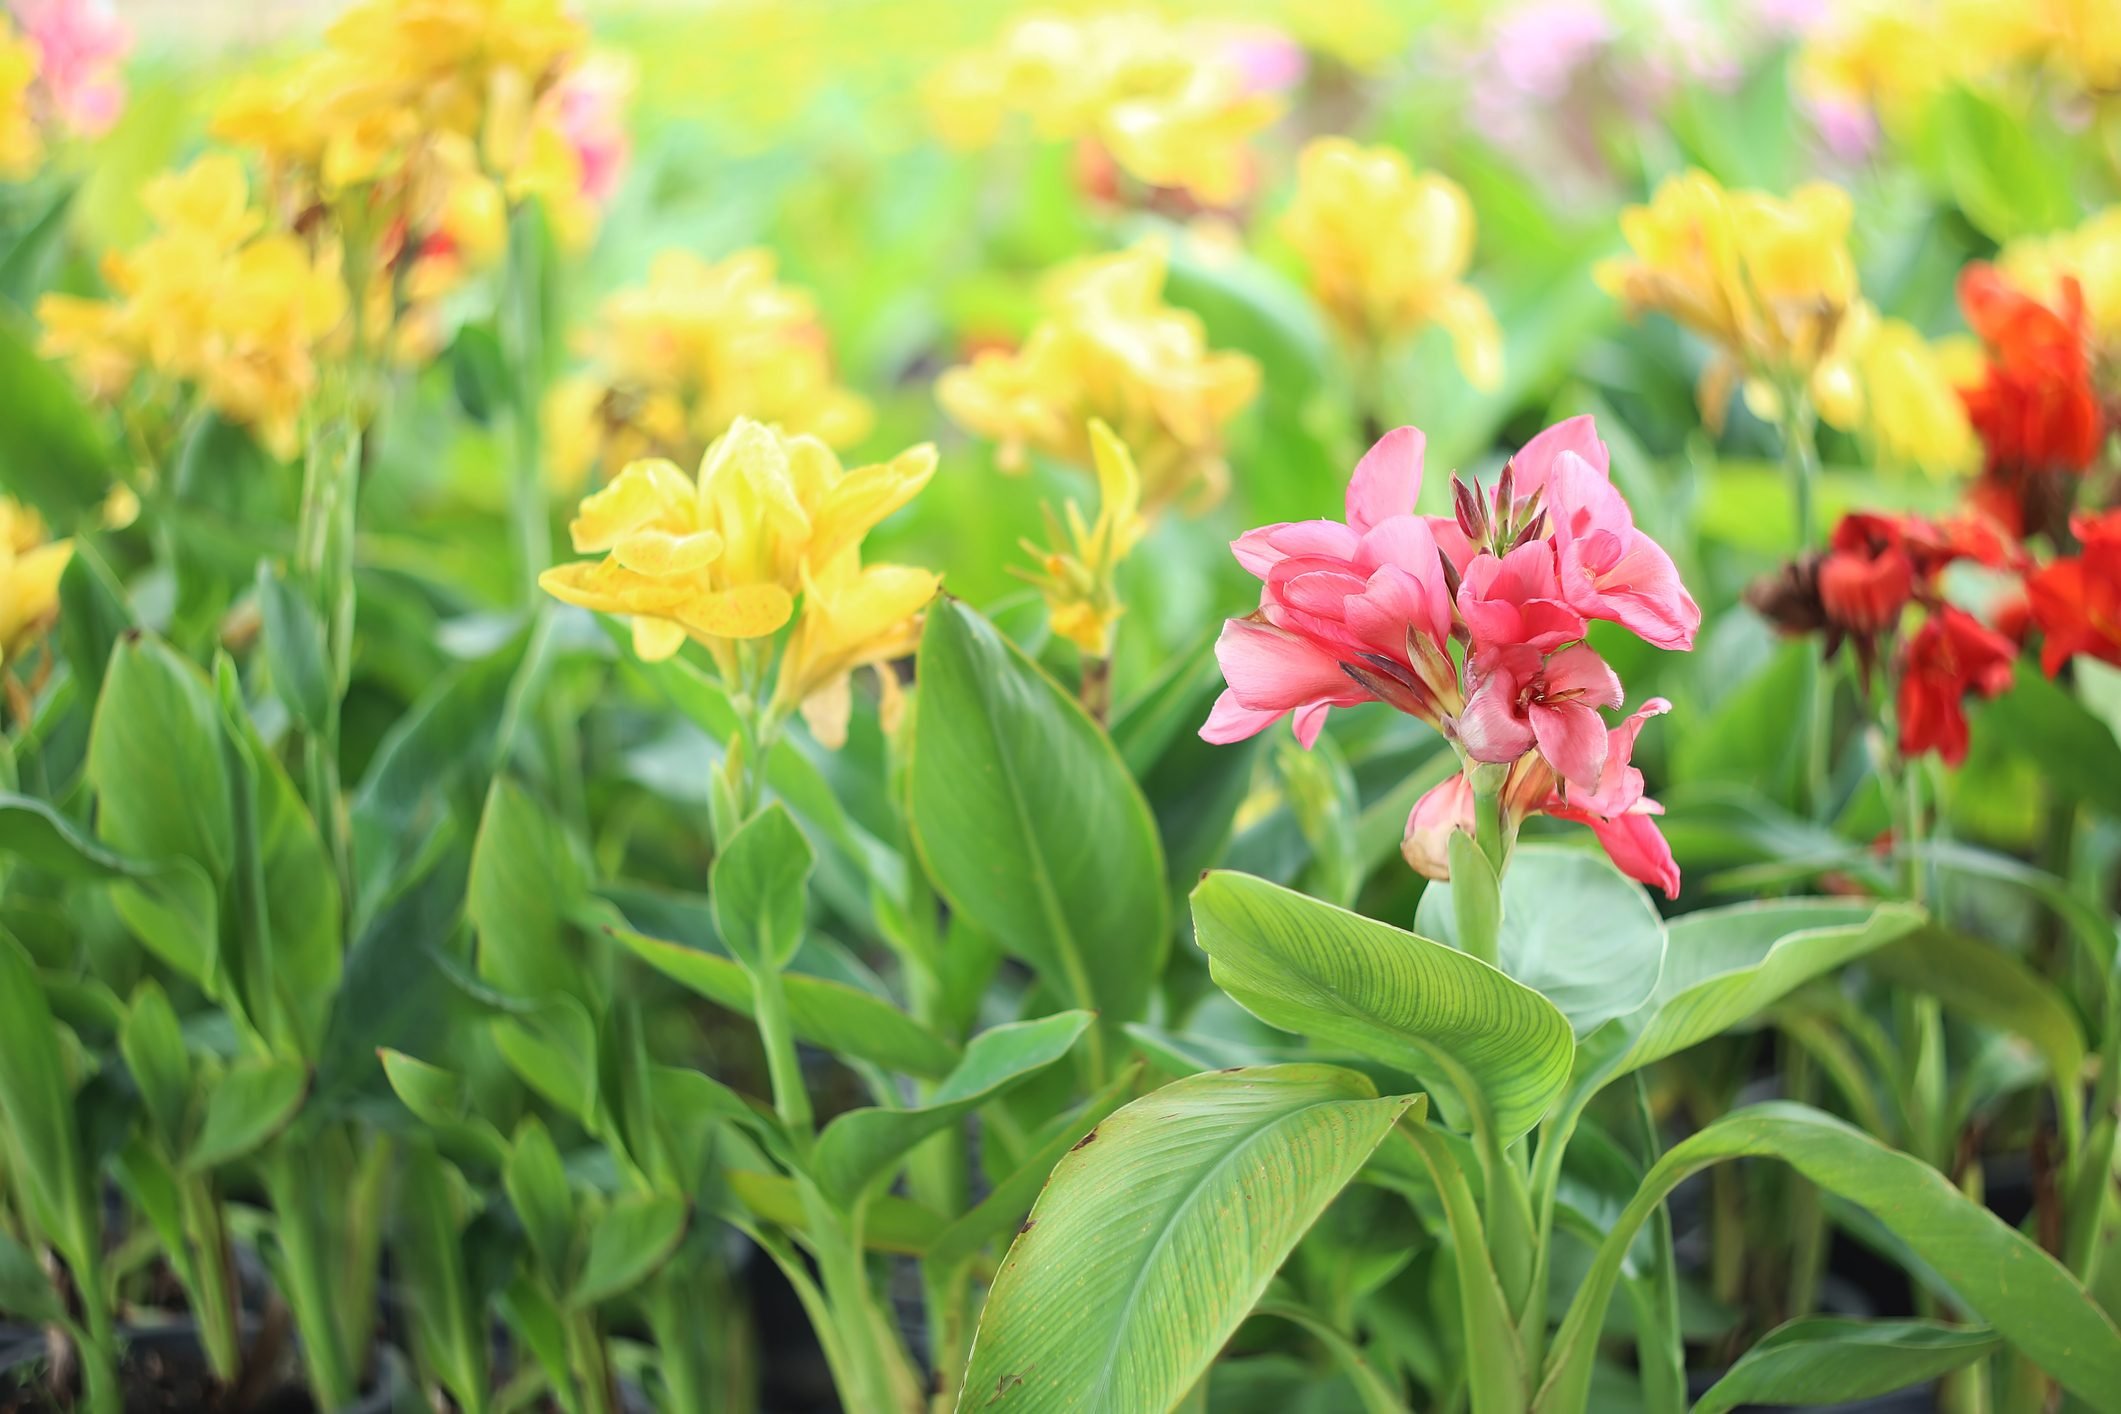 Colorful lily canna flowers .